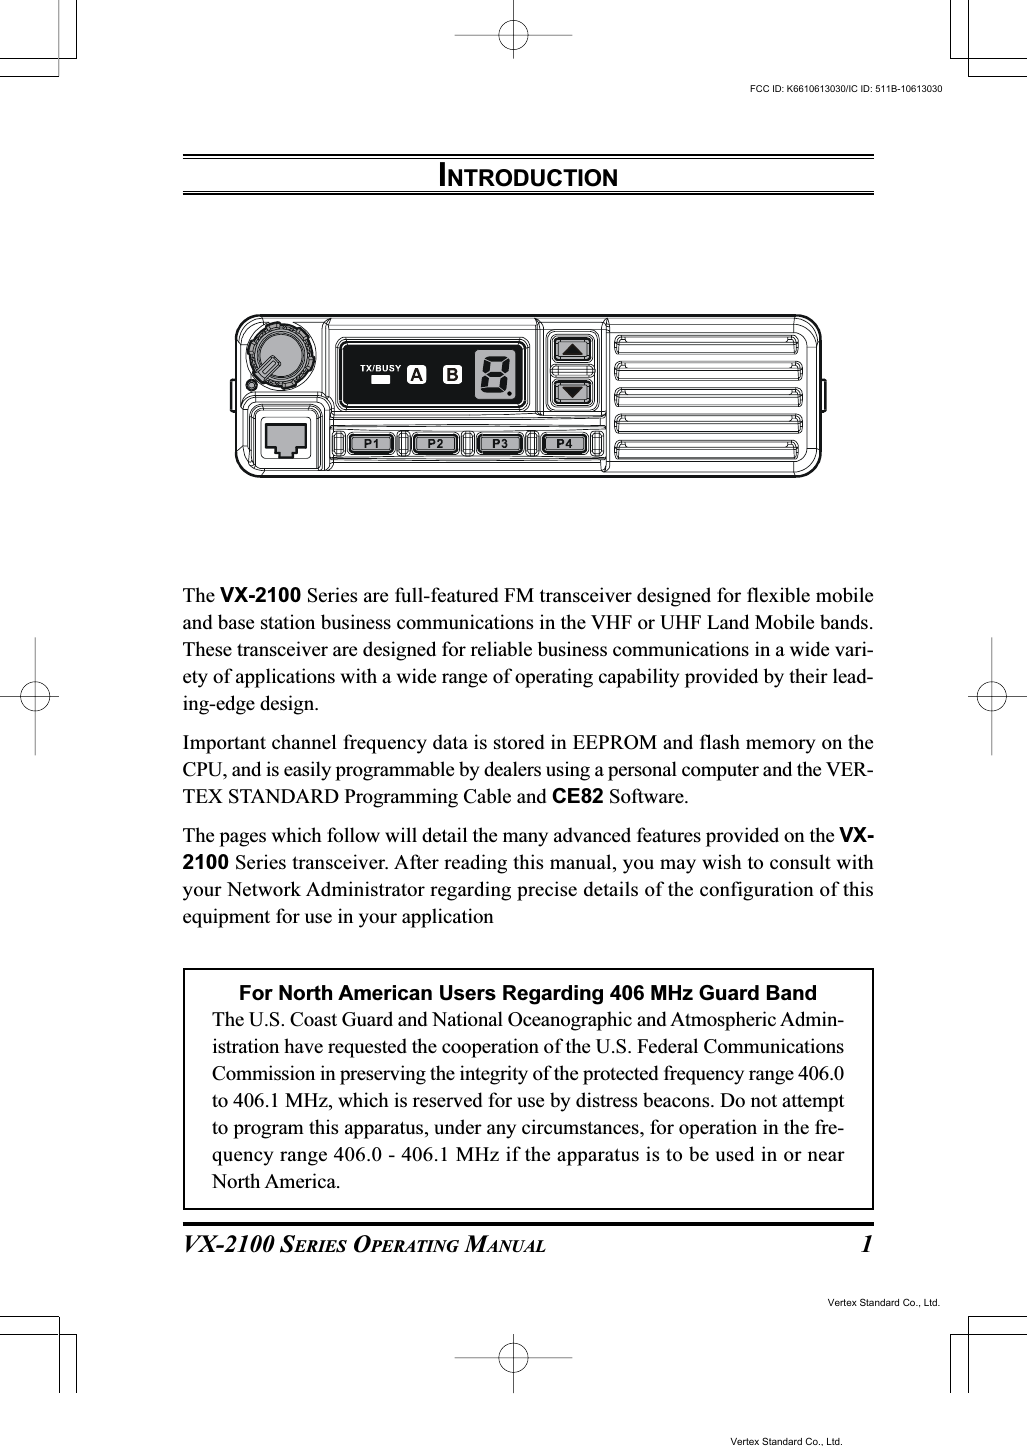 VX-2100 SERIES OPERATING MANUAL 1INTRODUCTIONThe VX-2100 Series are full-featured FM transceiver designed for flexible mobileand base station business communications in the VHF or UHF Land Mobile bands.These transceiver are designed for reliable business communications in a wide vari-ety of applications with a wide range of operating capability provided by their lead-ing-edge design.Important channel frequency data is stored in EEPROM and flash memory on theCPU, and is easily programmable by dealers using a personal computer and the VER-TEX STANDARD Programming Cable and CE82 Software.The pages which follow will detail the many advanced features provided on the VX-2100 Series transceiver. After reading this manual, you may wish to consult withyour Network Administrator regarding precise details of the configuration of thisequipment for use in your applicationFor North American Users Regarding 406 MHz Guard BandThe U.S. Coast Guard and National Oceanographic and Atmospheric Admin-istration have requested the cooperation of the U.S. Federal CommunicationsCommission in preserving the integrity of the protected frequency range 406.0to 406.1 MHz, which is reserved for use by distress beacons. Do not attemptto program this apparatus, under any circumstances, for operation in the fre-quency range 406.0 - 406.1 MHz if the apparatus is to be used in or nearNorth America.Vertex Standard Co., Ltd.FCC ID: K6610613030/IC ID: 511B-10613030Vertex Standard Co., Ltd.